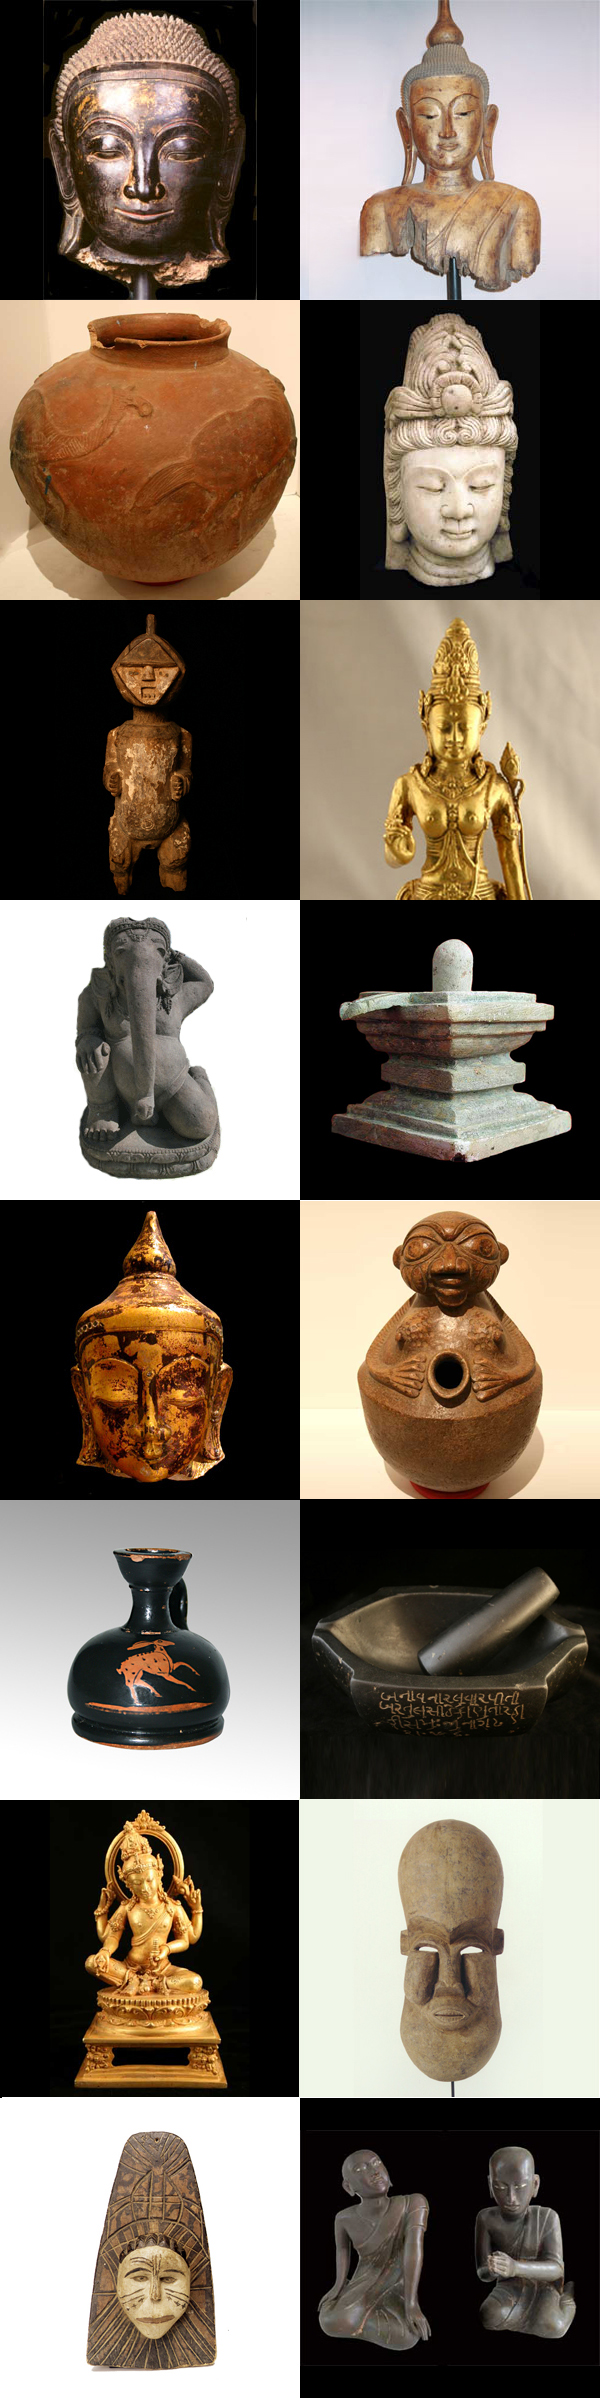 barakat gallery International Ancient art artifacts relics religious Eastern middle pre-columbian non-western sculpture